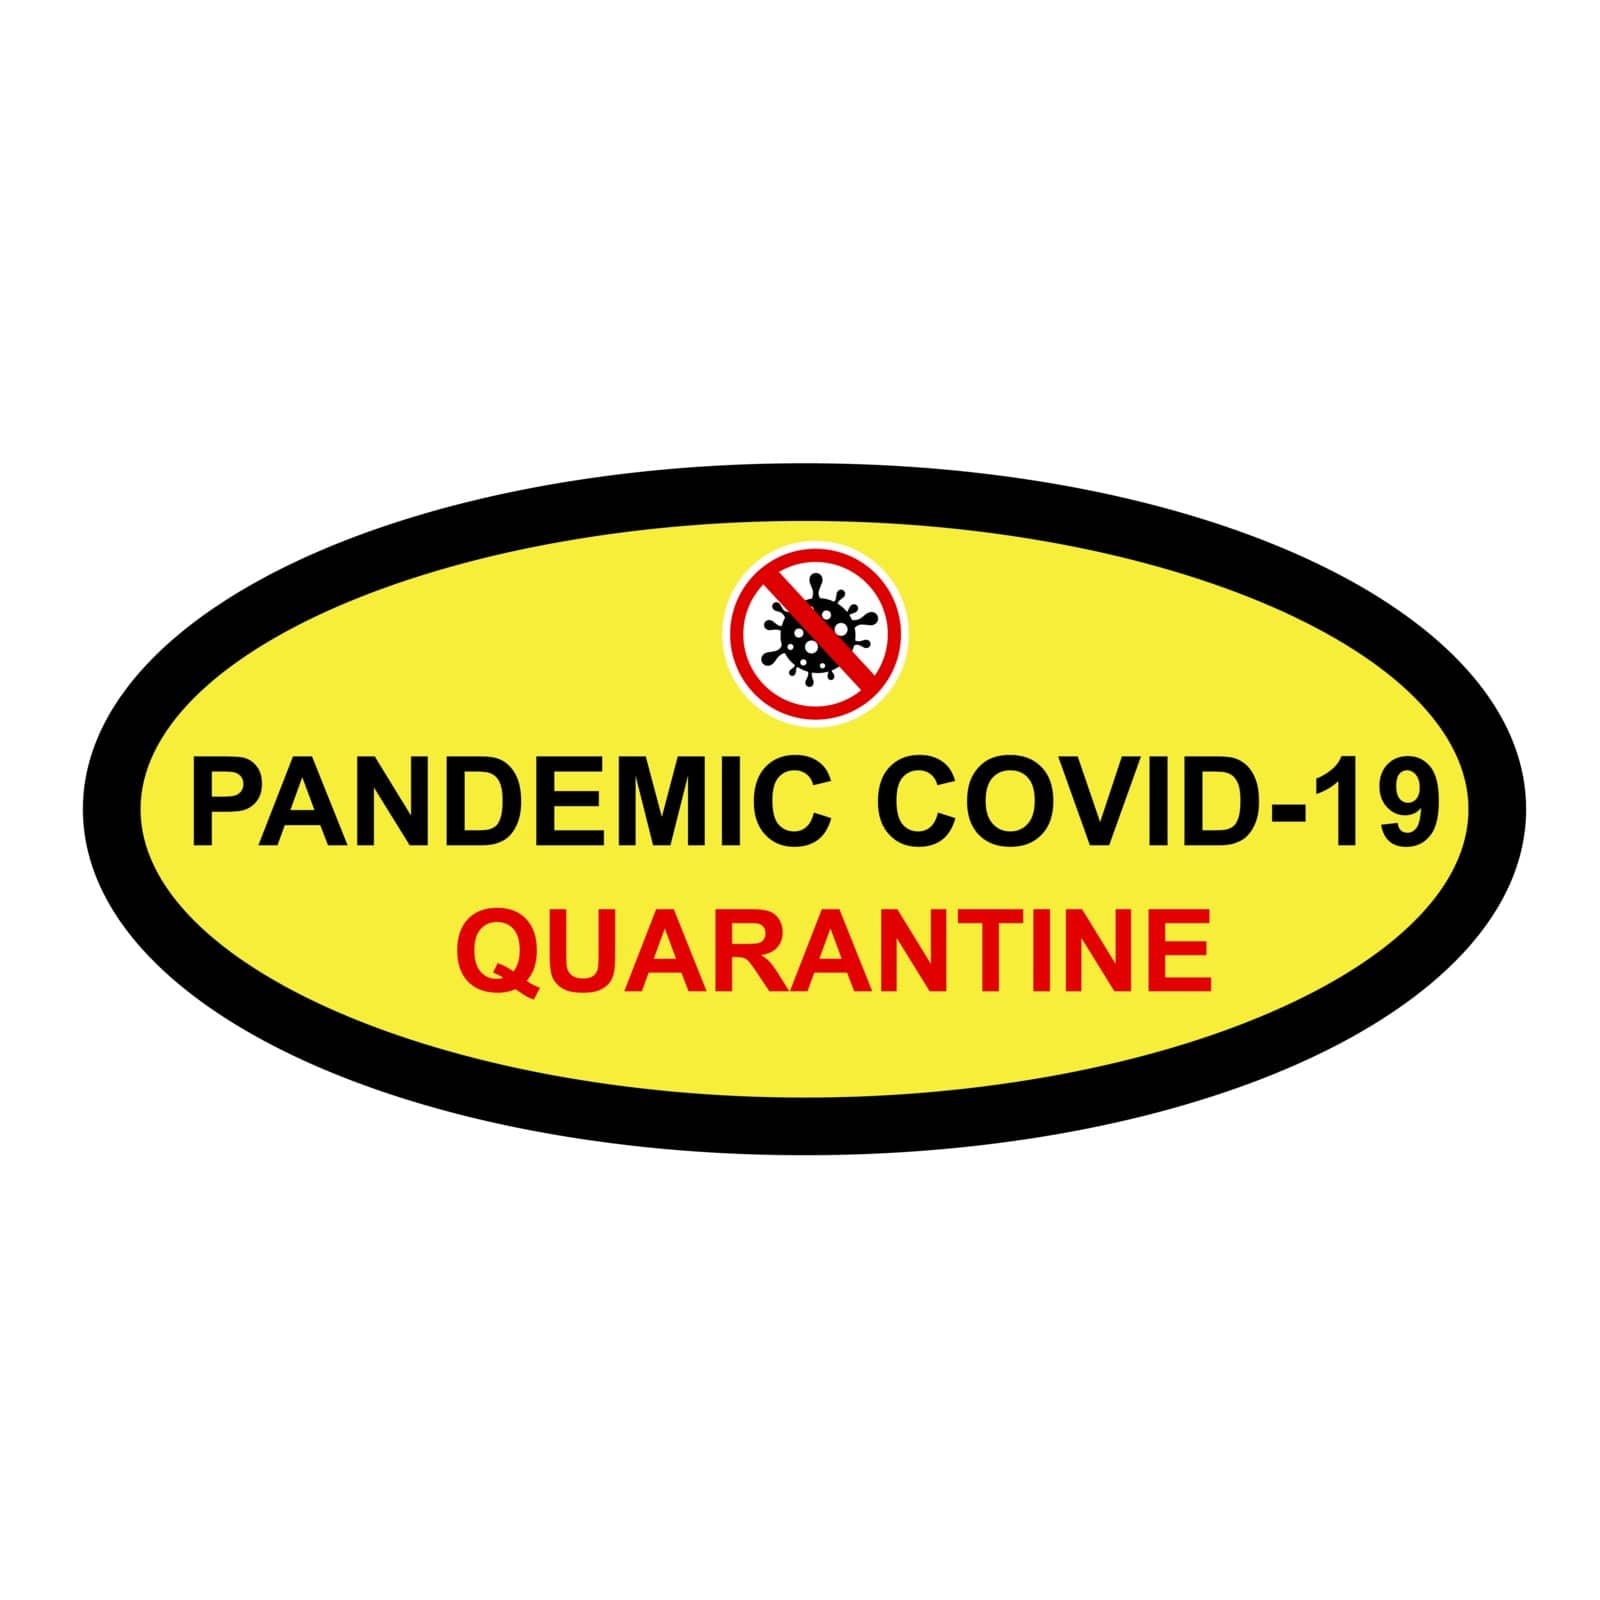 Simple Cutting Sticker, Vector Sign Caution Warning, Quarantine Outbreak Alert from Covid-19 by om_yos